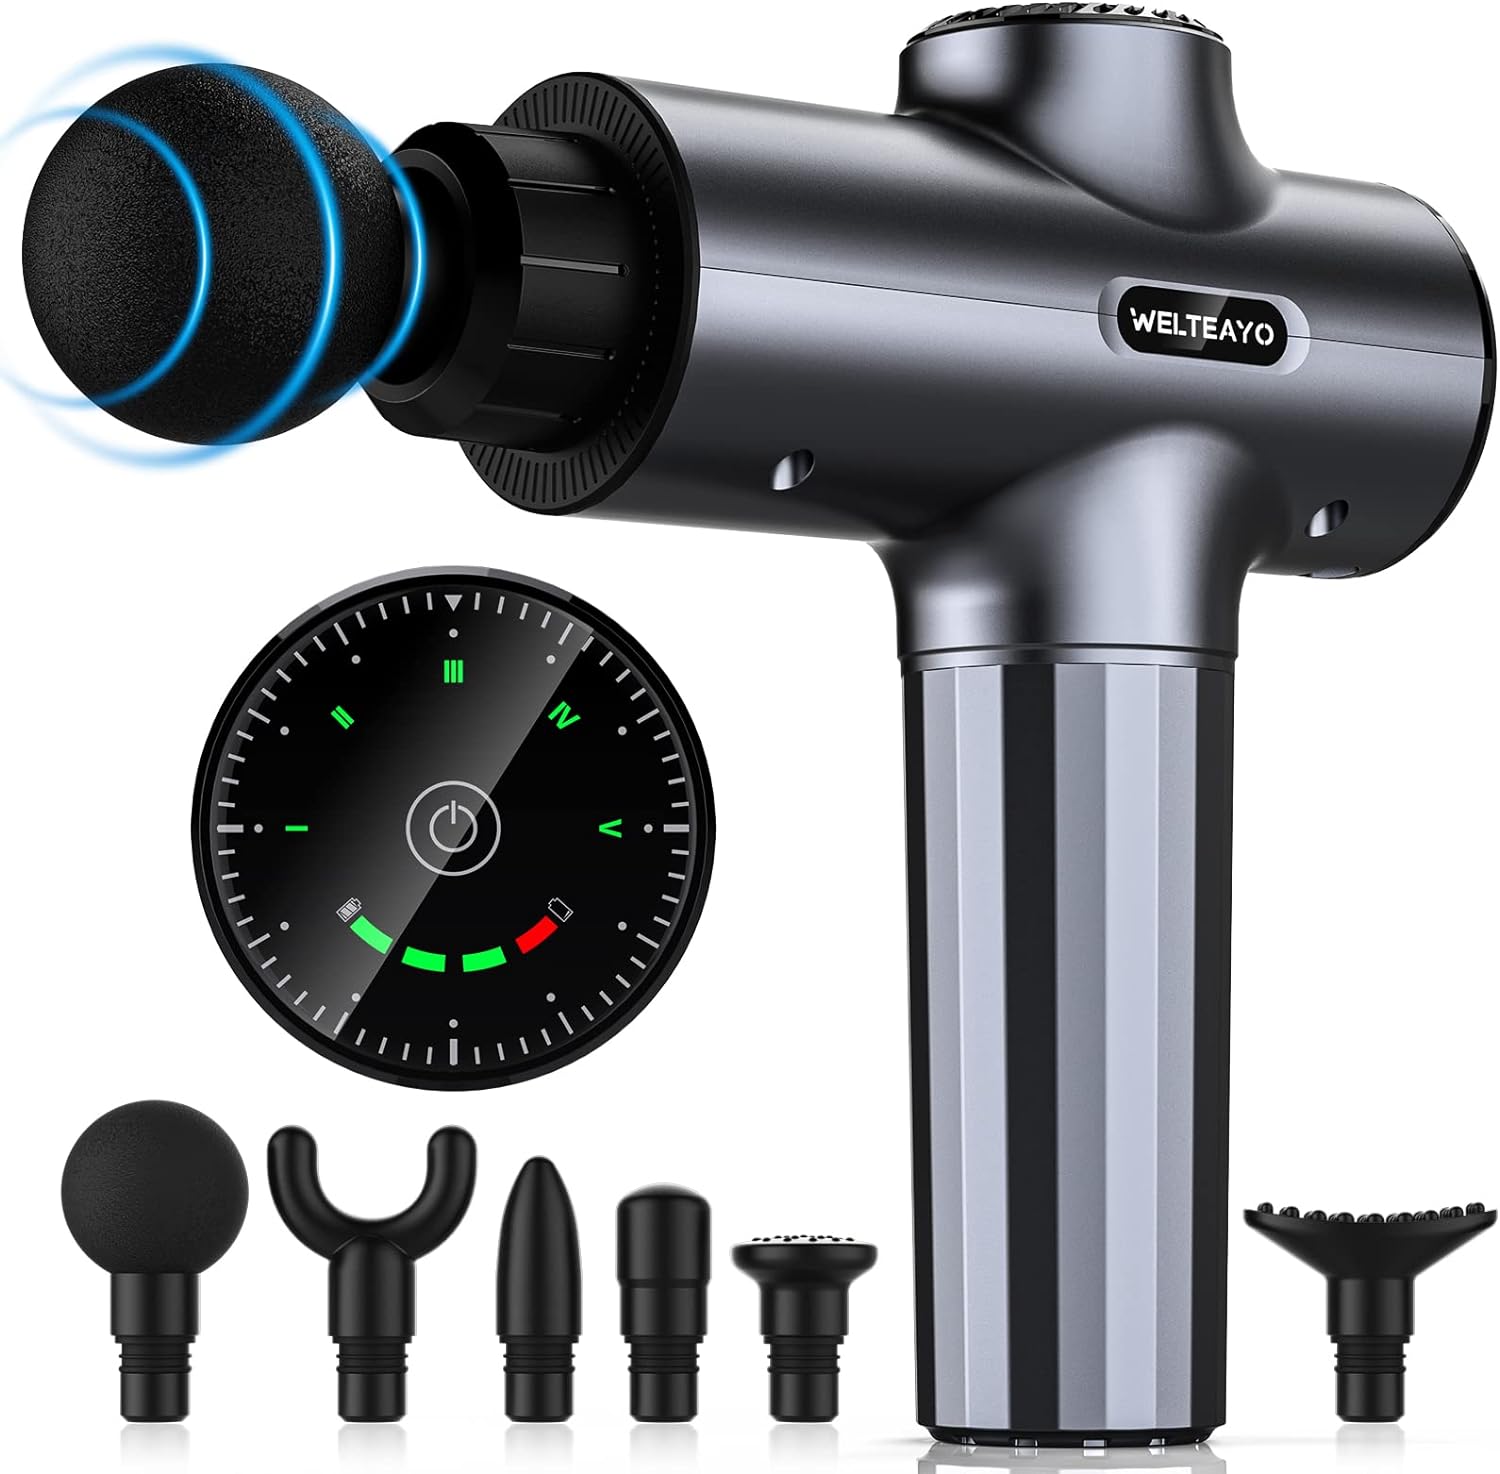 Discover Exciting Discounts on the Massage Gun - Save 40%!